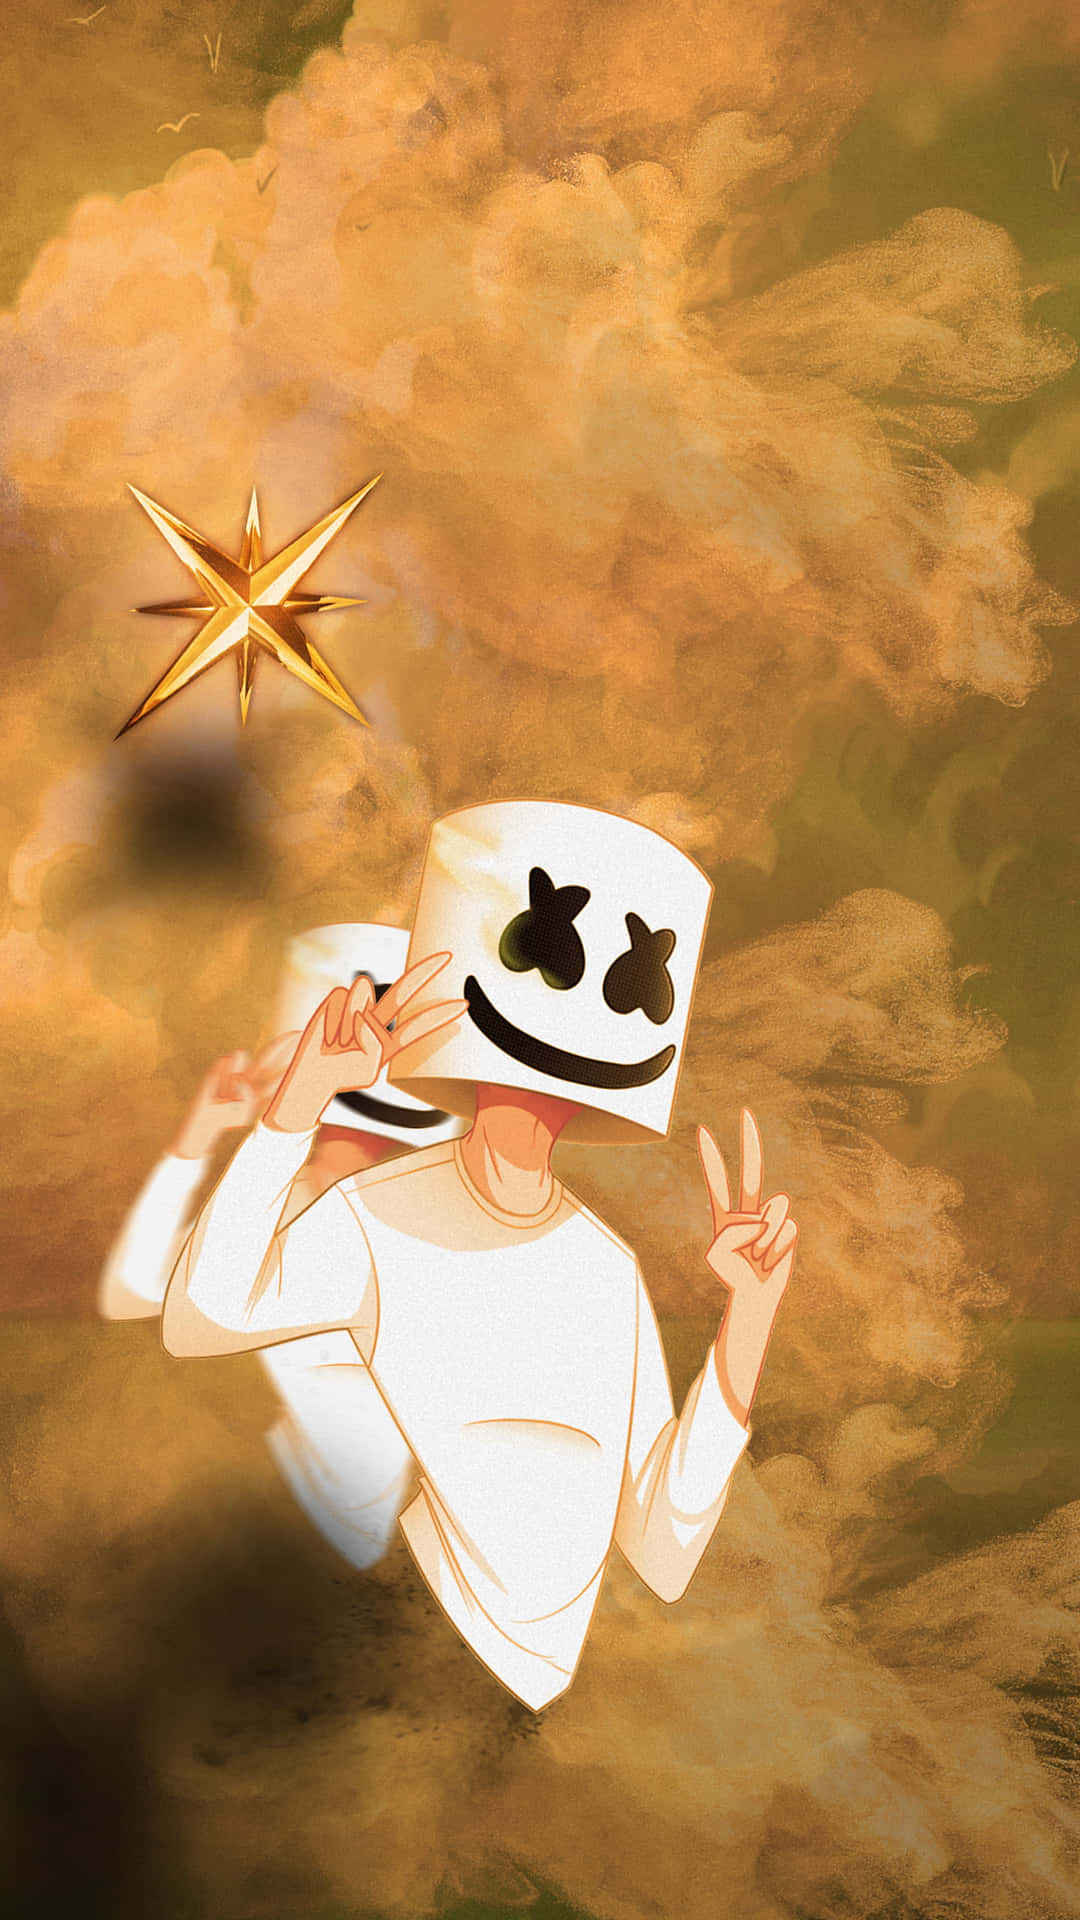 Marshmello Takes the World by Storm! Wallpaper